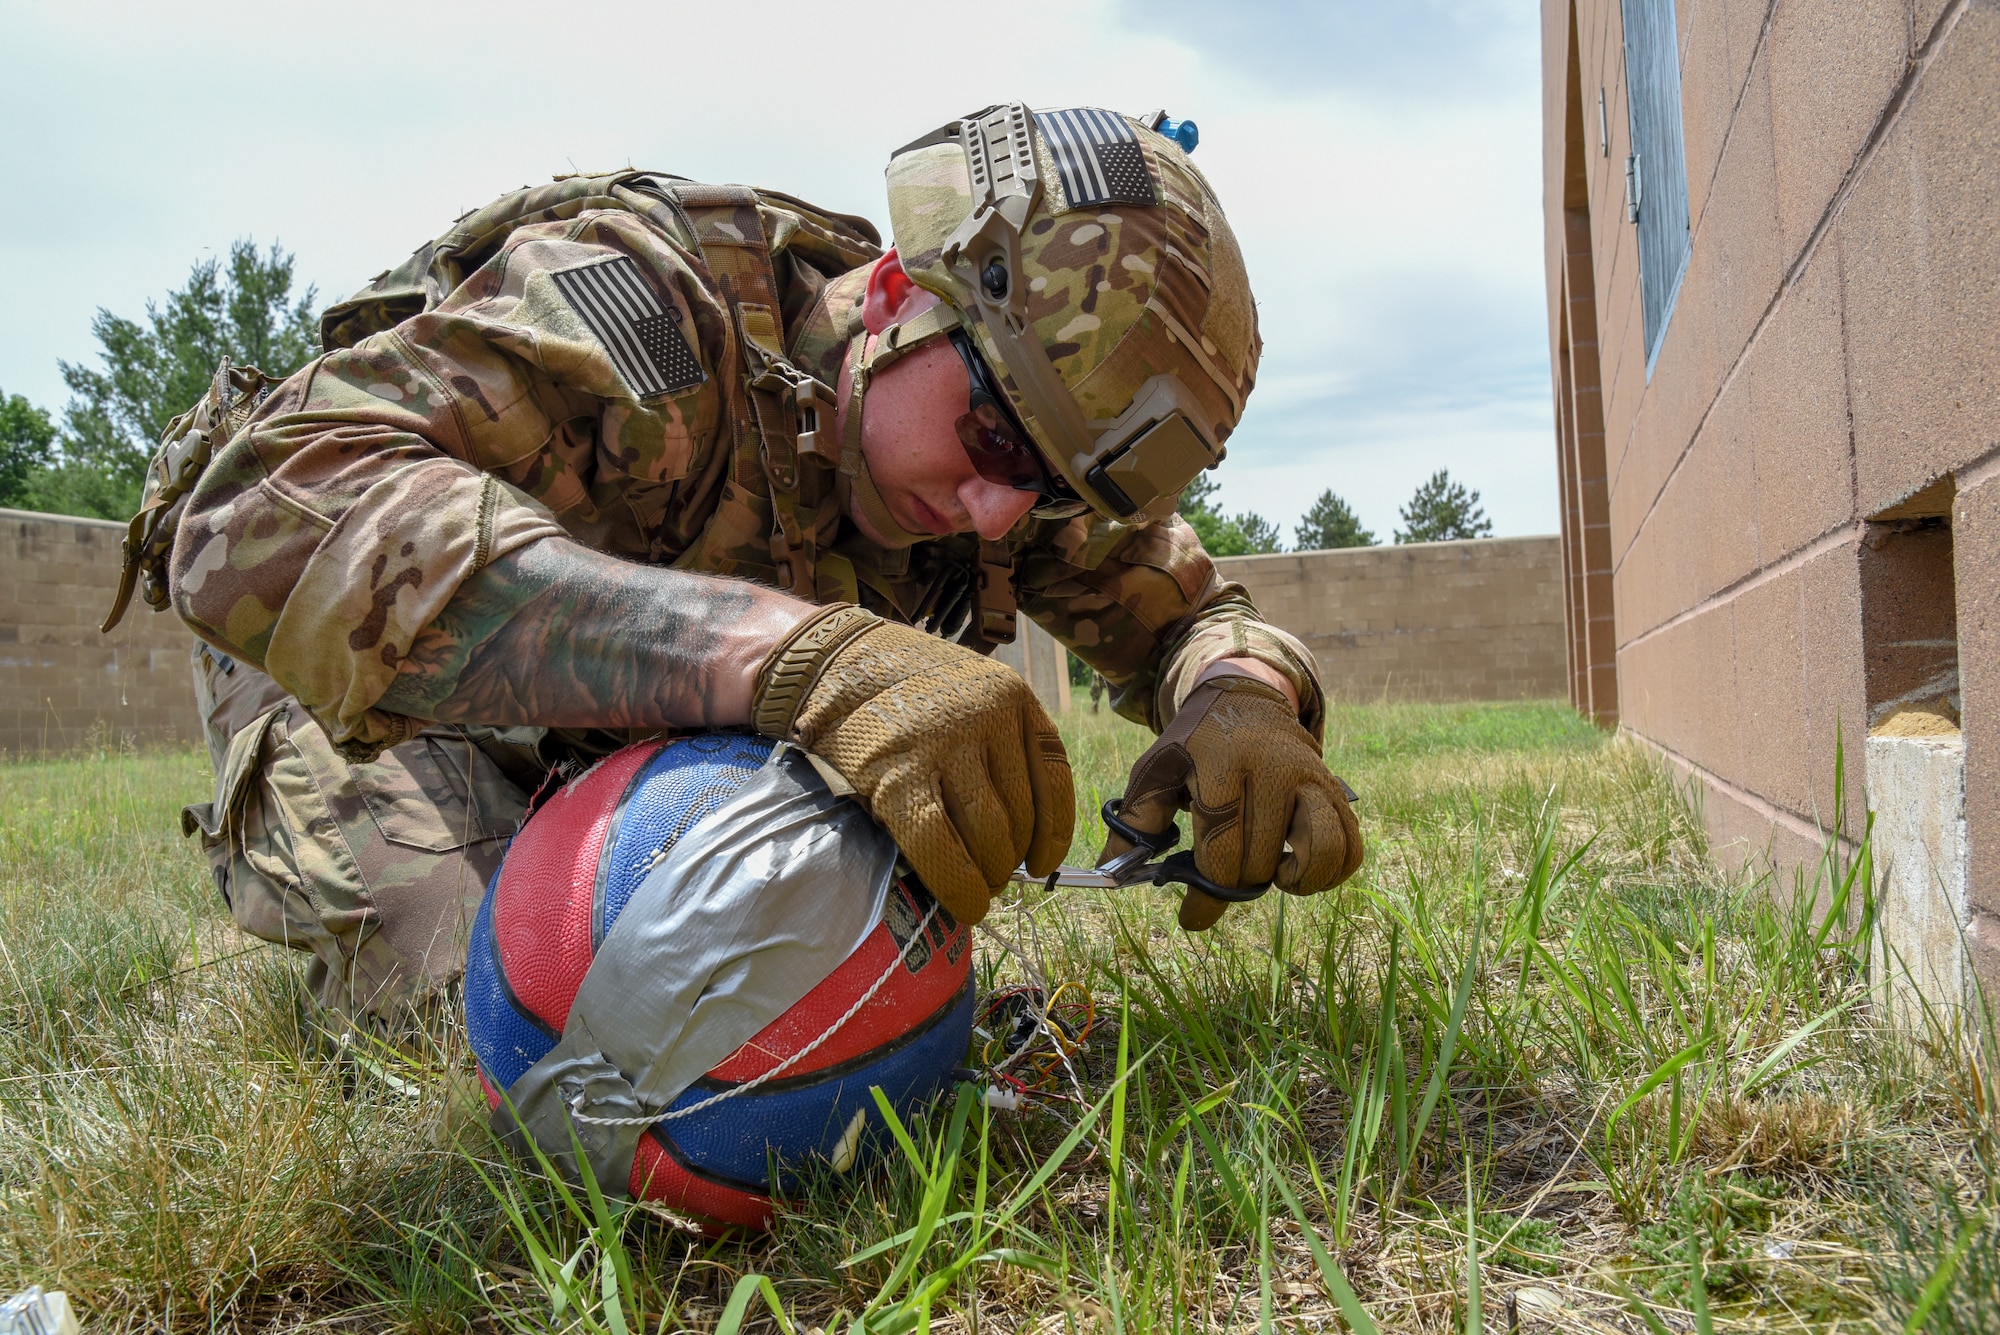 Senior Airman Alec Camp, an Explosive Ordnance Disposal technician with the 142nd Fighter Wing, Portland Air National Guard Base, Oregon, disrupts a possible explosive train June 22, 2018, during a training exercise on Fort McCoy, Wisconsin. The exercise, known as Audacious Warrior, provides EOD Airmen with required training over the course of two weeks.(U.S. Air National Guard photo by Airman Cameron Lewis)